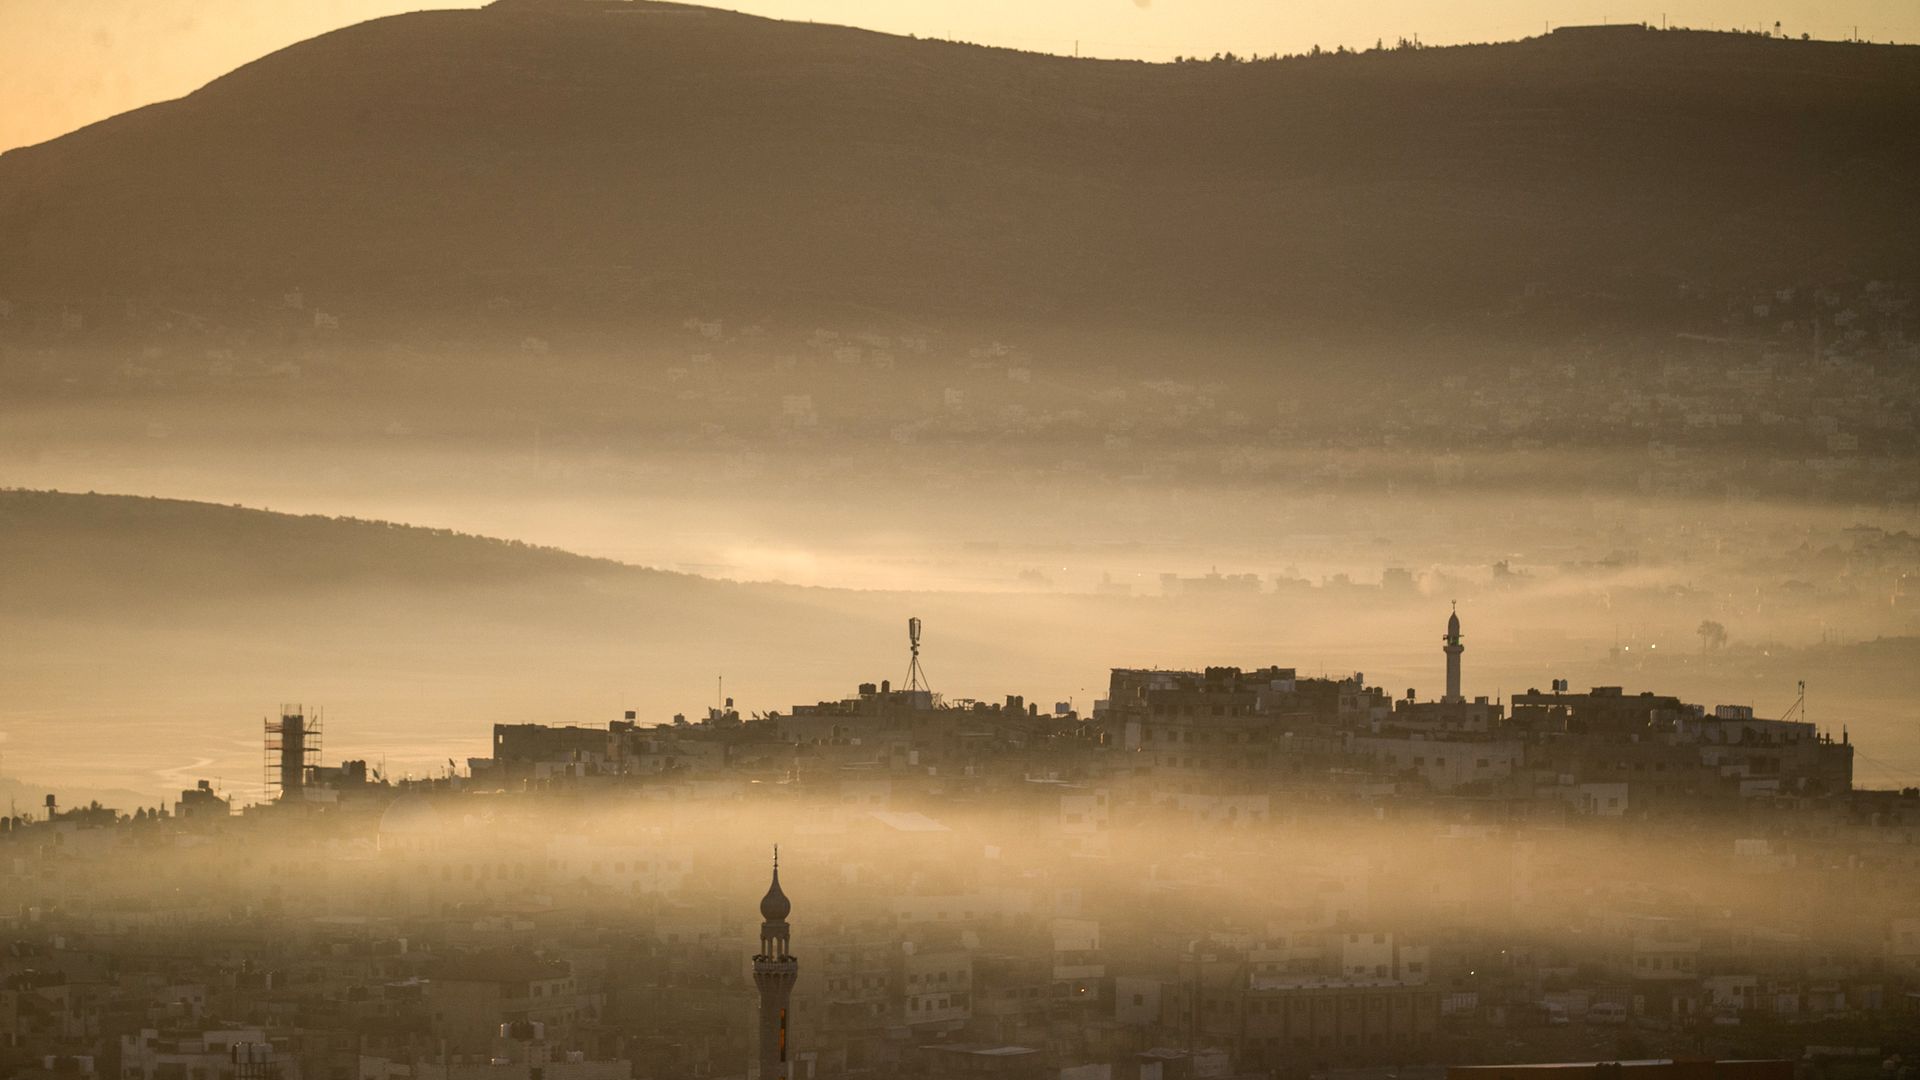 Landscape of Nablus, the West Bank, at dawn.